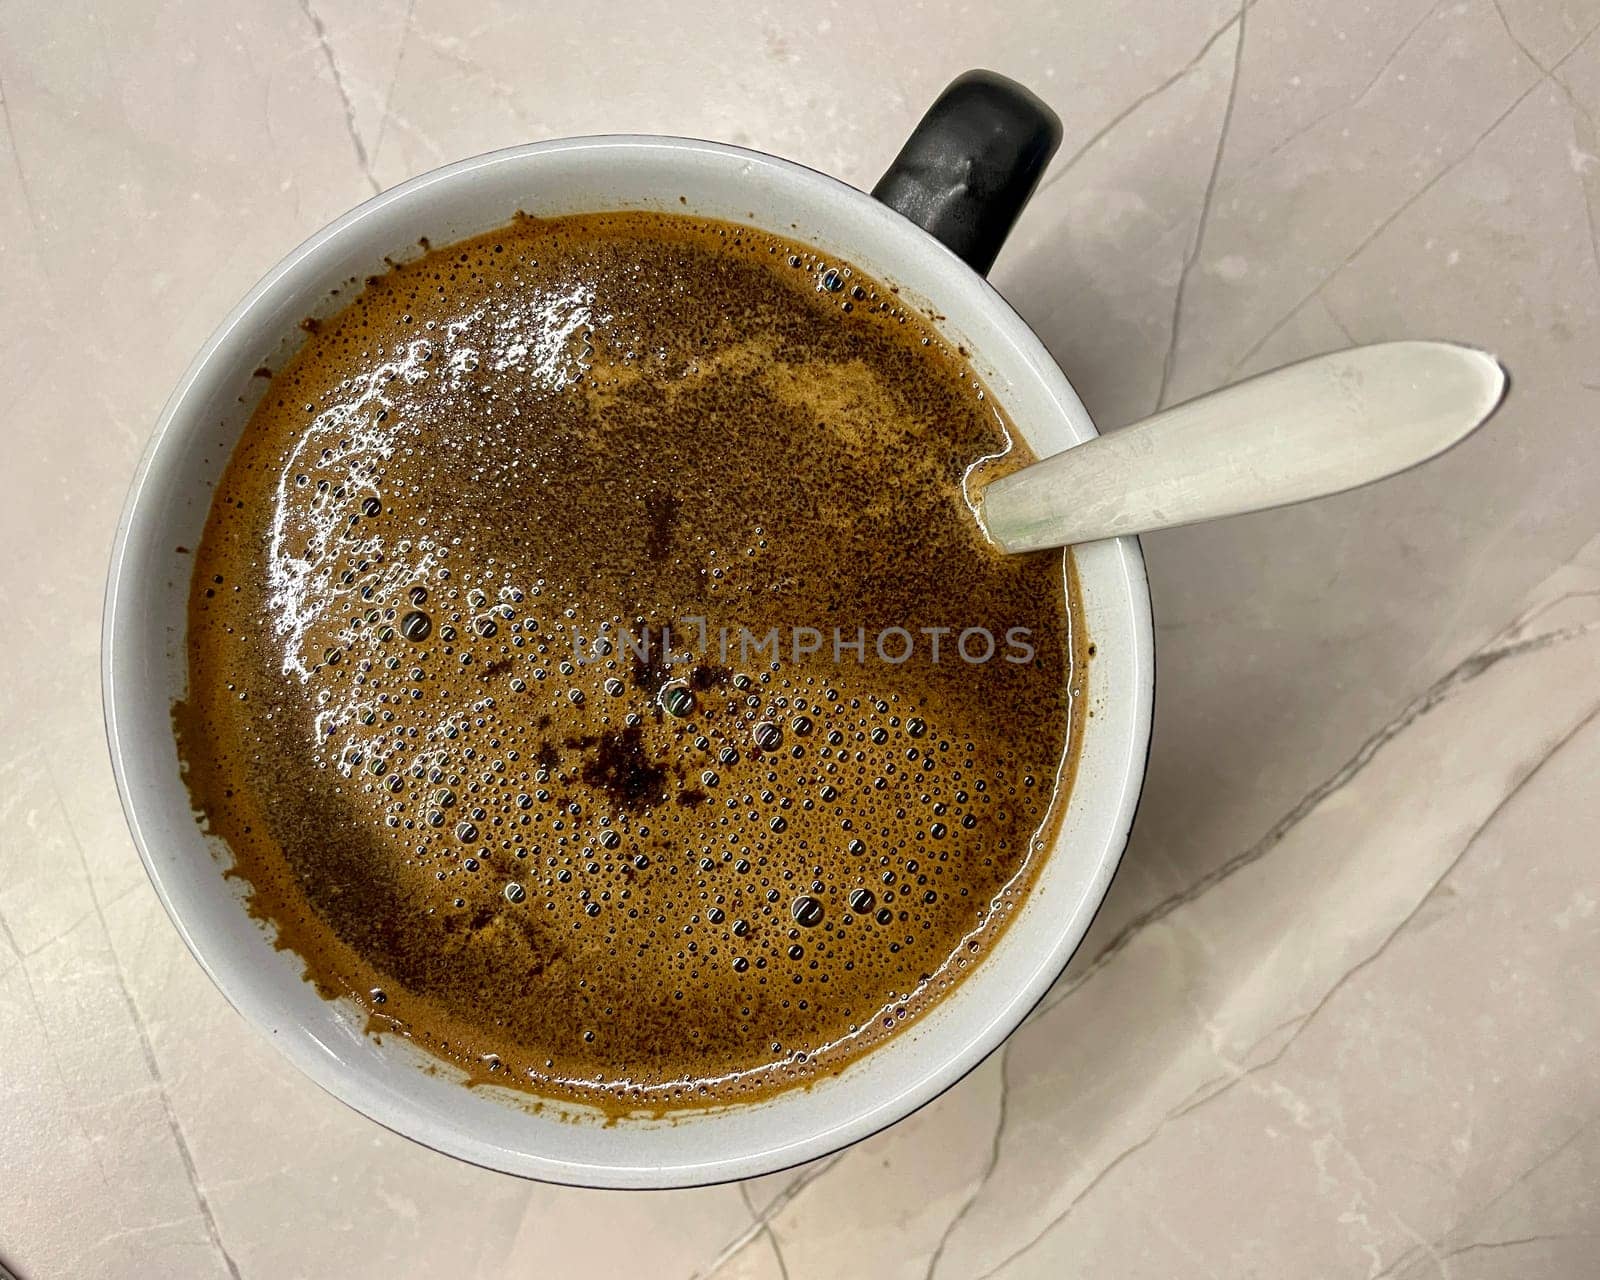 on a gray background, a cup of morning hot coffee and a teaspoon. High quality photo